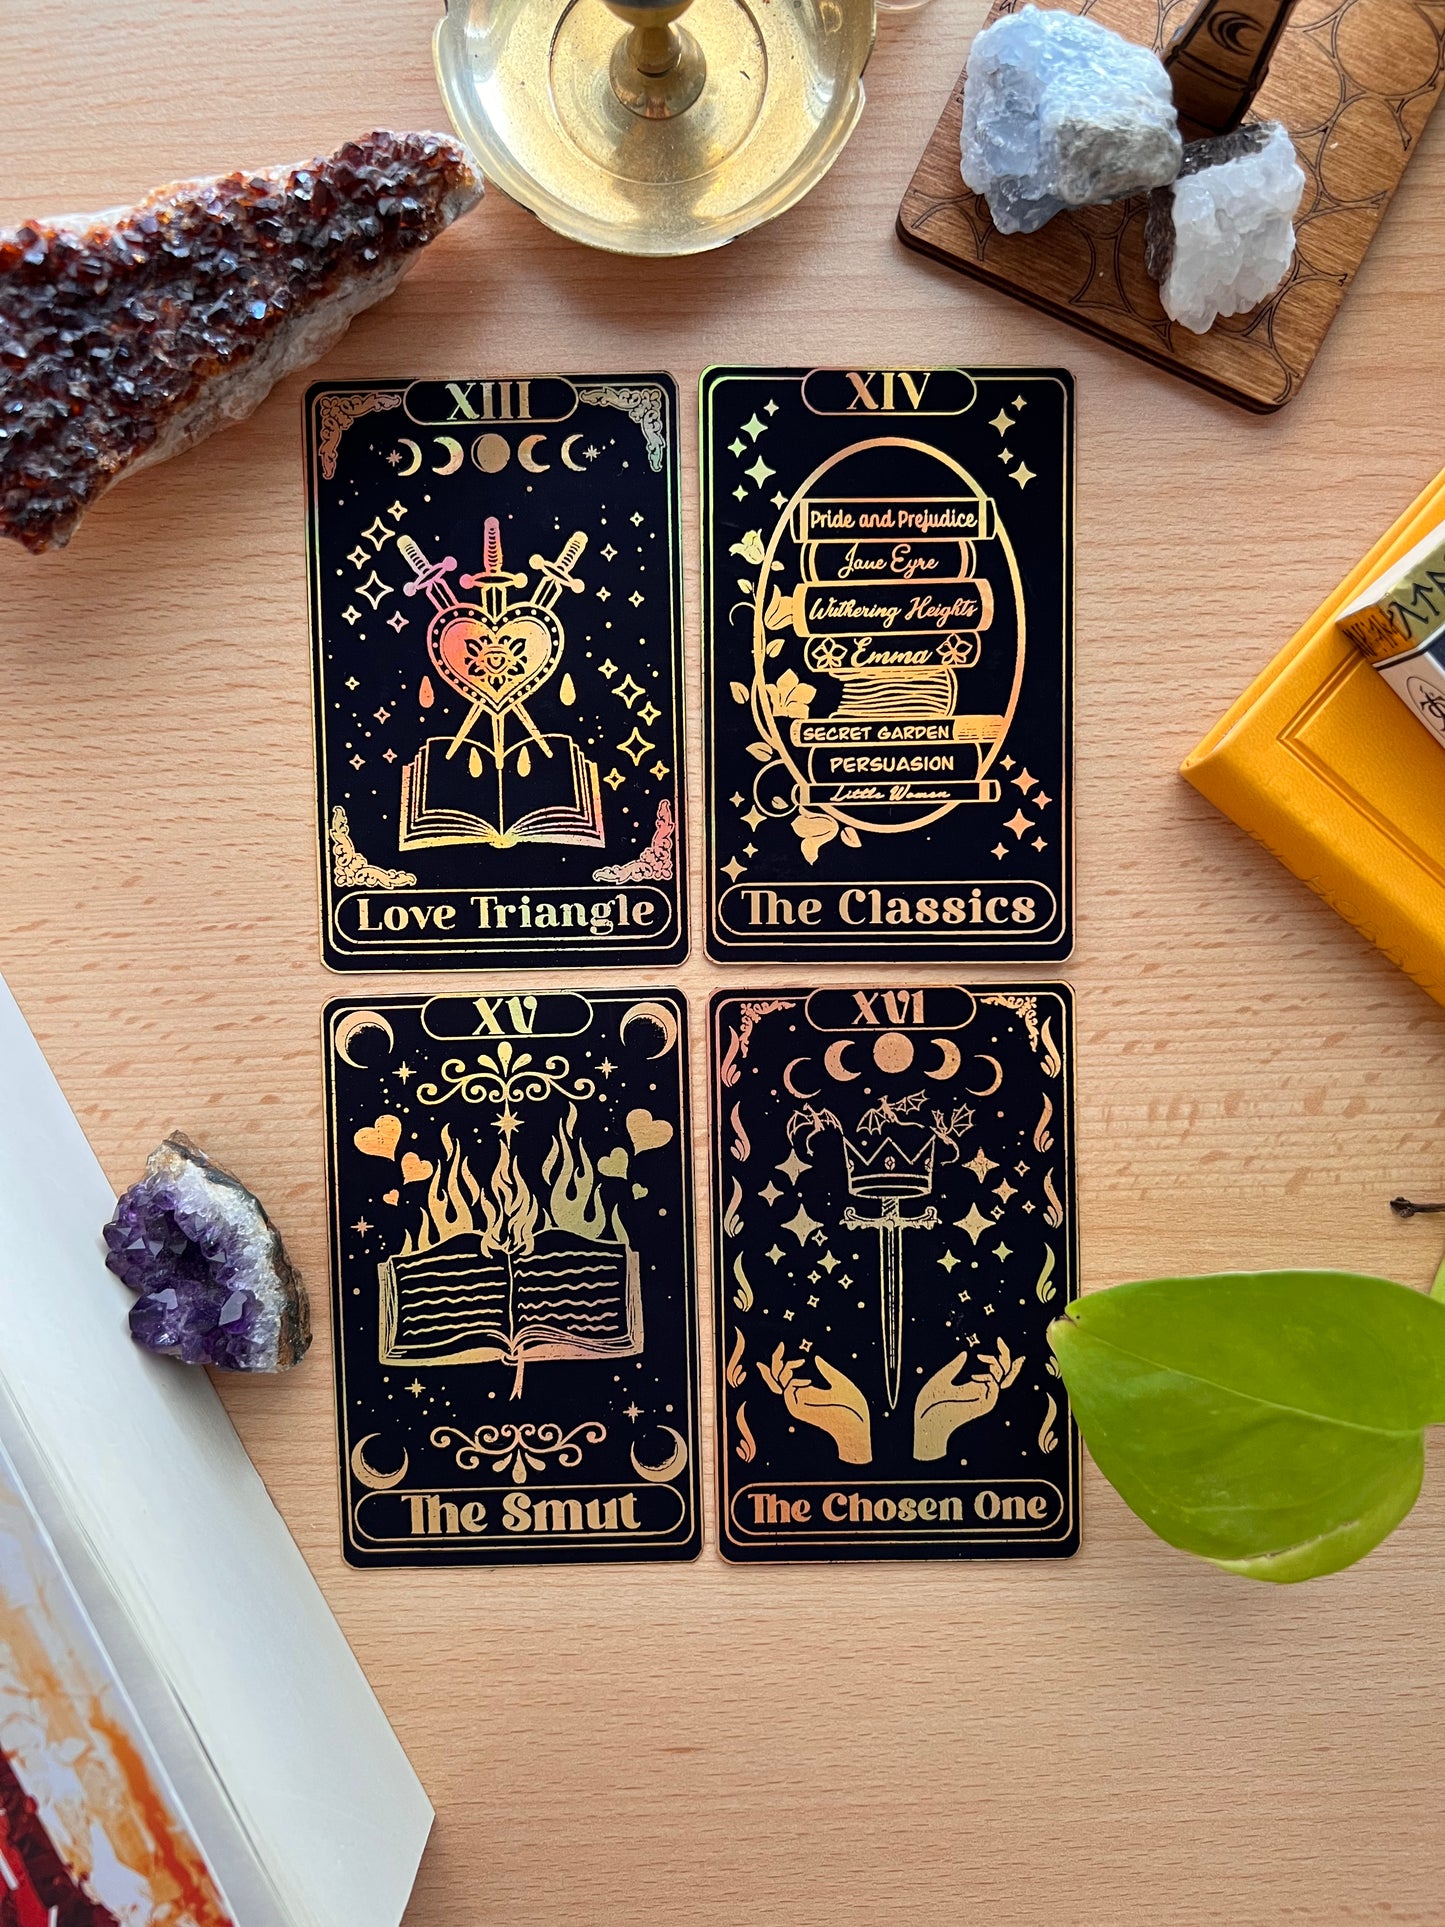 Book trope “tarot cards” holographic